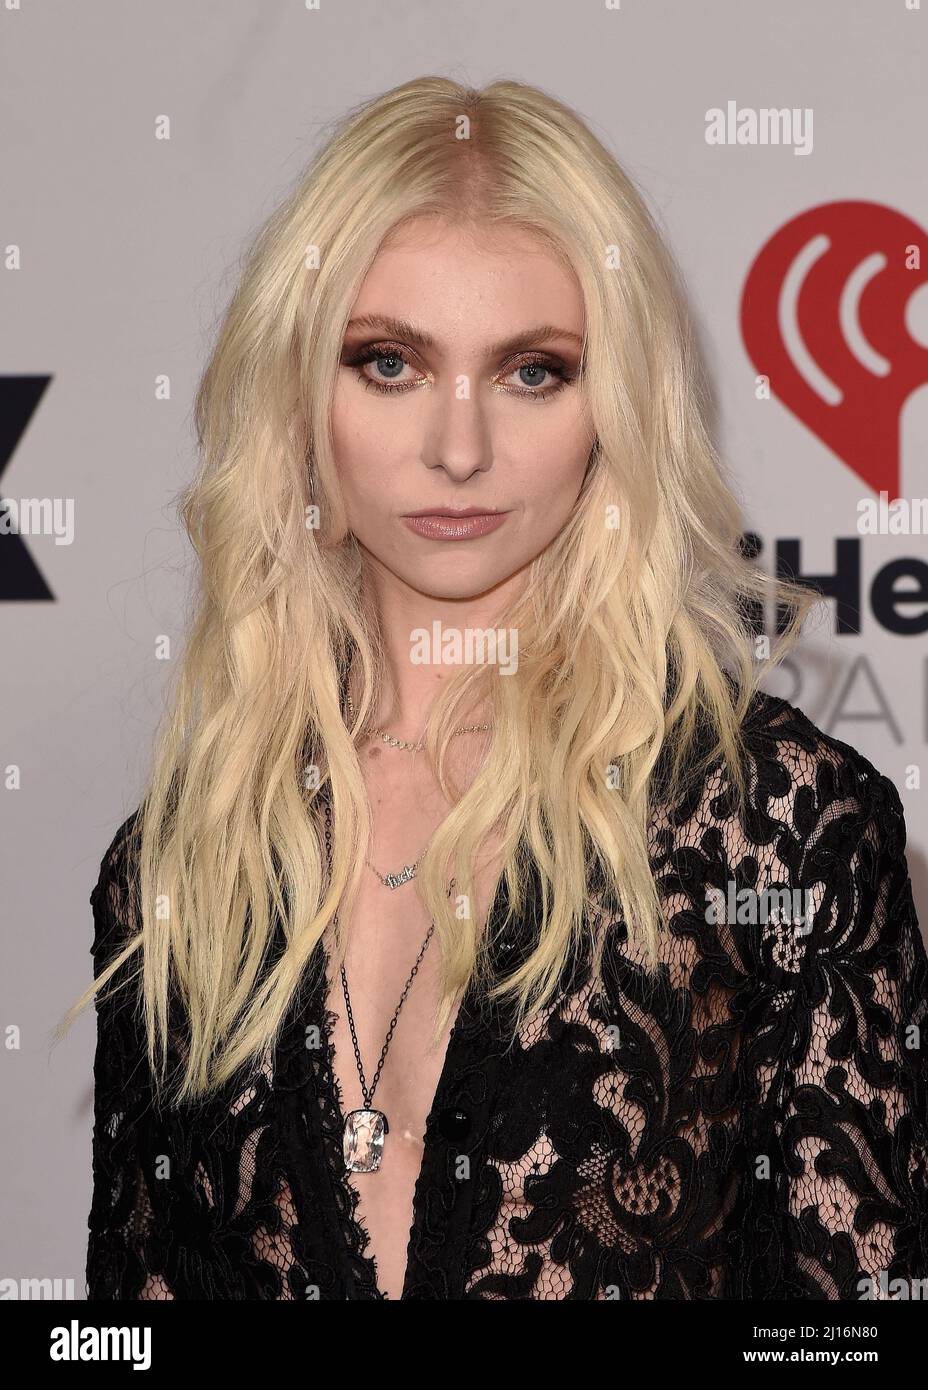 2022 IHEARTRADIO MUSIC AWARDS: Taylor Momsen at the 2021 “iHeartRadio Music Awards” airing live from The Shrine Auditorium in Los Angeles, Tuesday, March 22 (8:00-10:00 PM ET Live/PT tape-delayed) on FOX. CR: Scott Kirkland/PictureGroup/Sipa USA for FOX. Credit: 2022 FOX MEDIA, LLC. Credit: Sipa USA/Alamy Live News Stock Photo